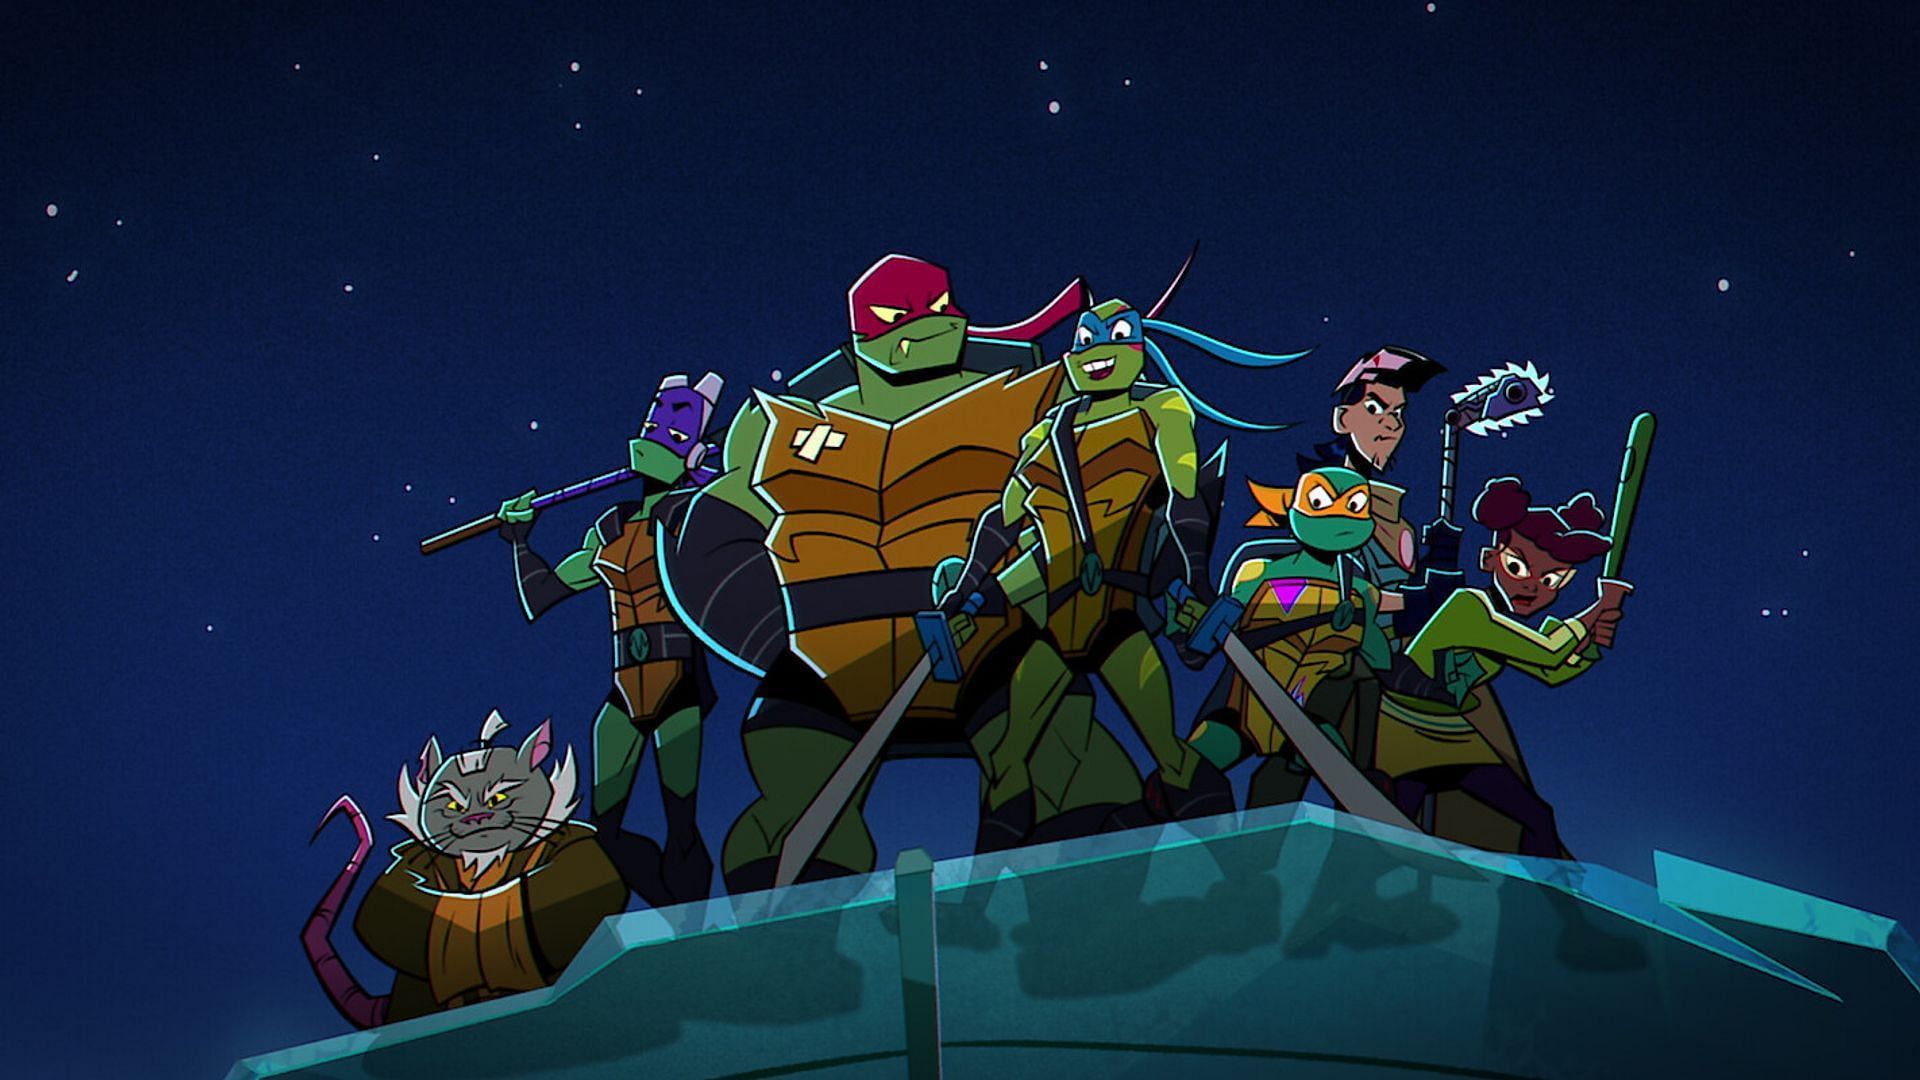 What time will Rise of the Teenage Mutant Ninja Turtles The Movie air